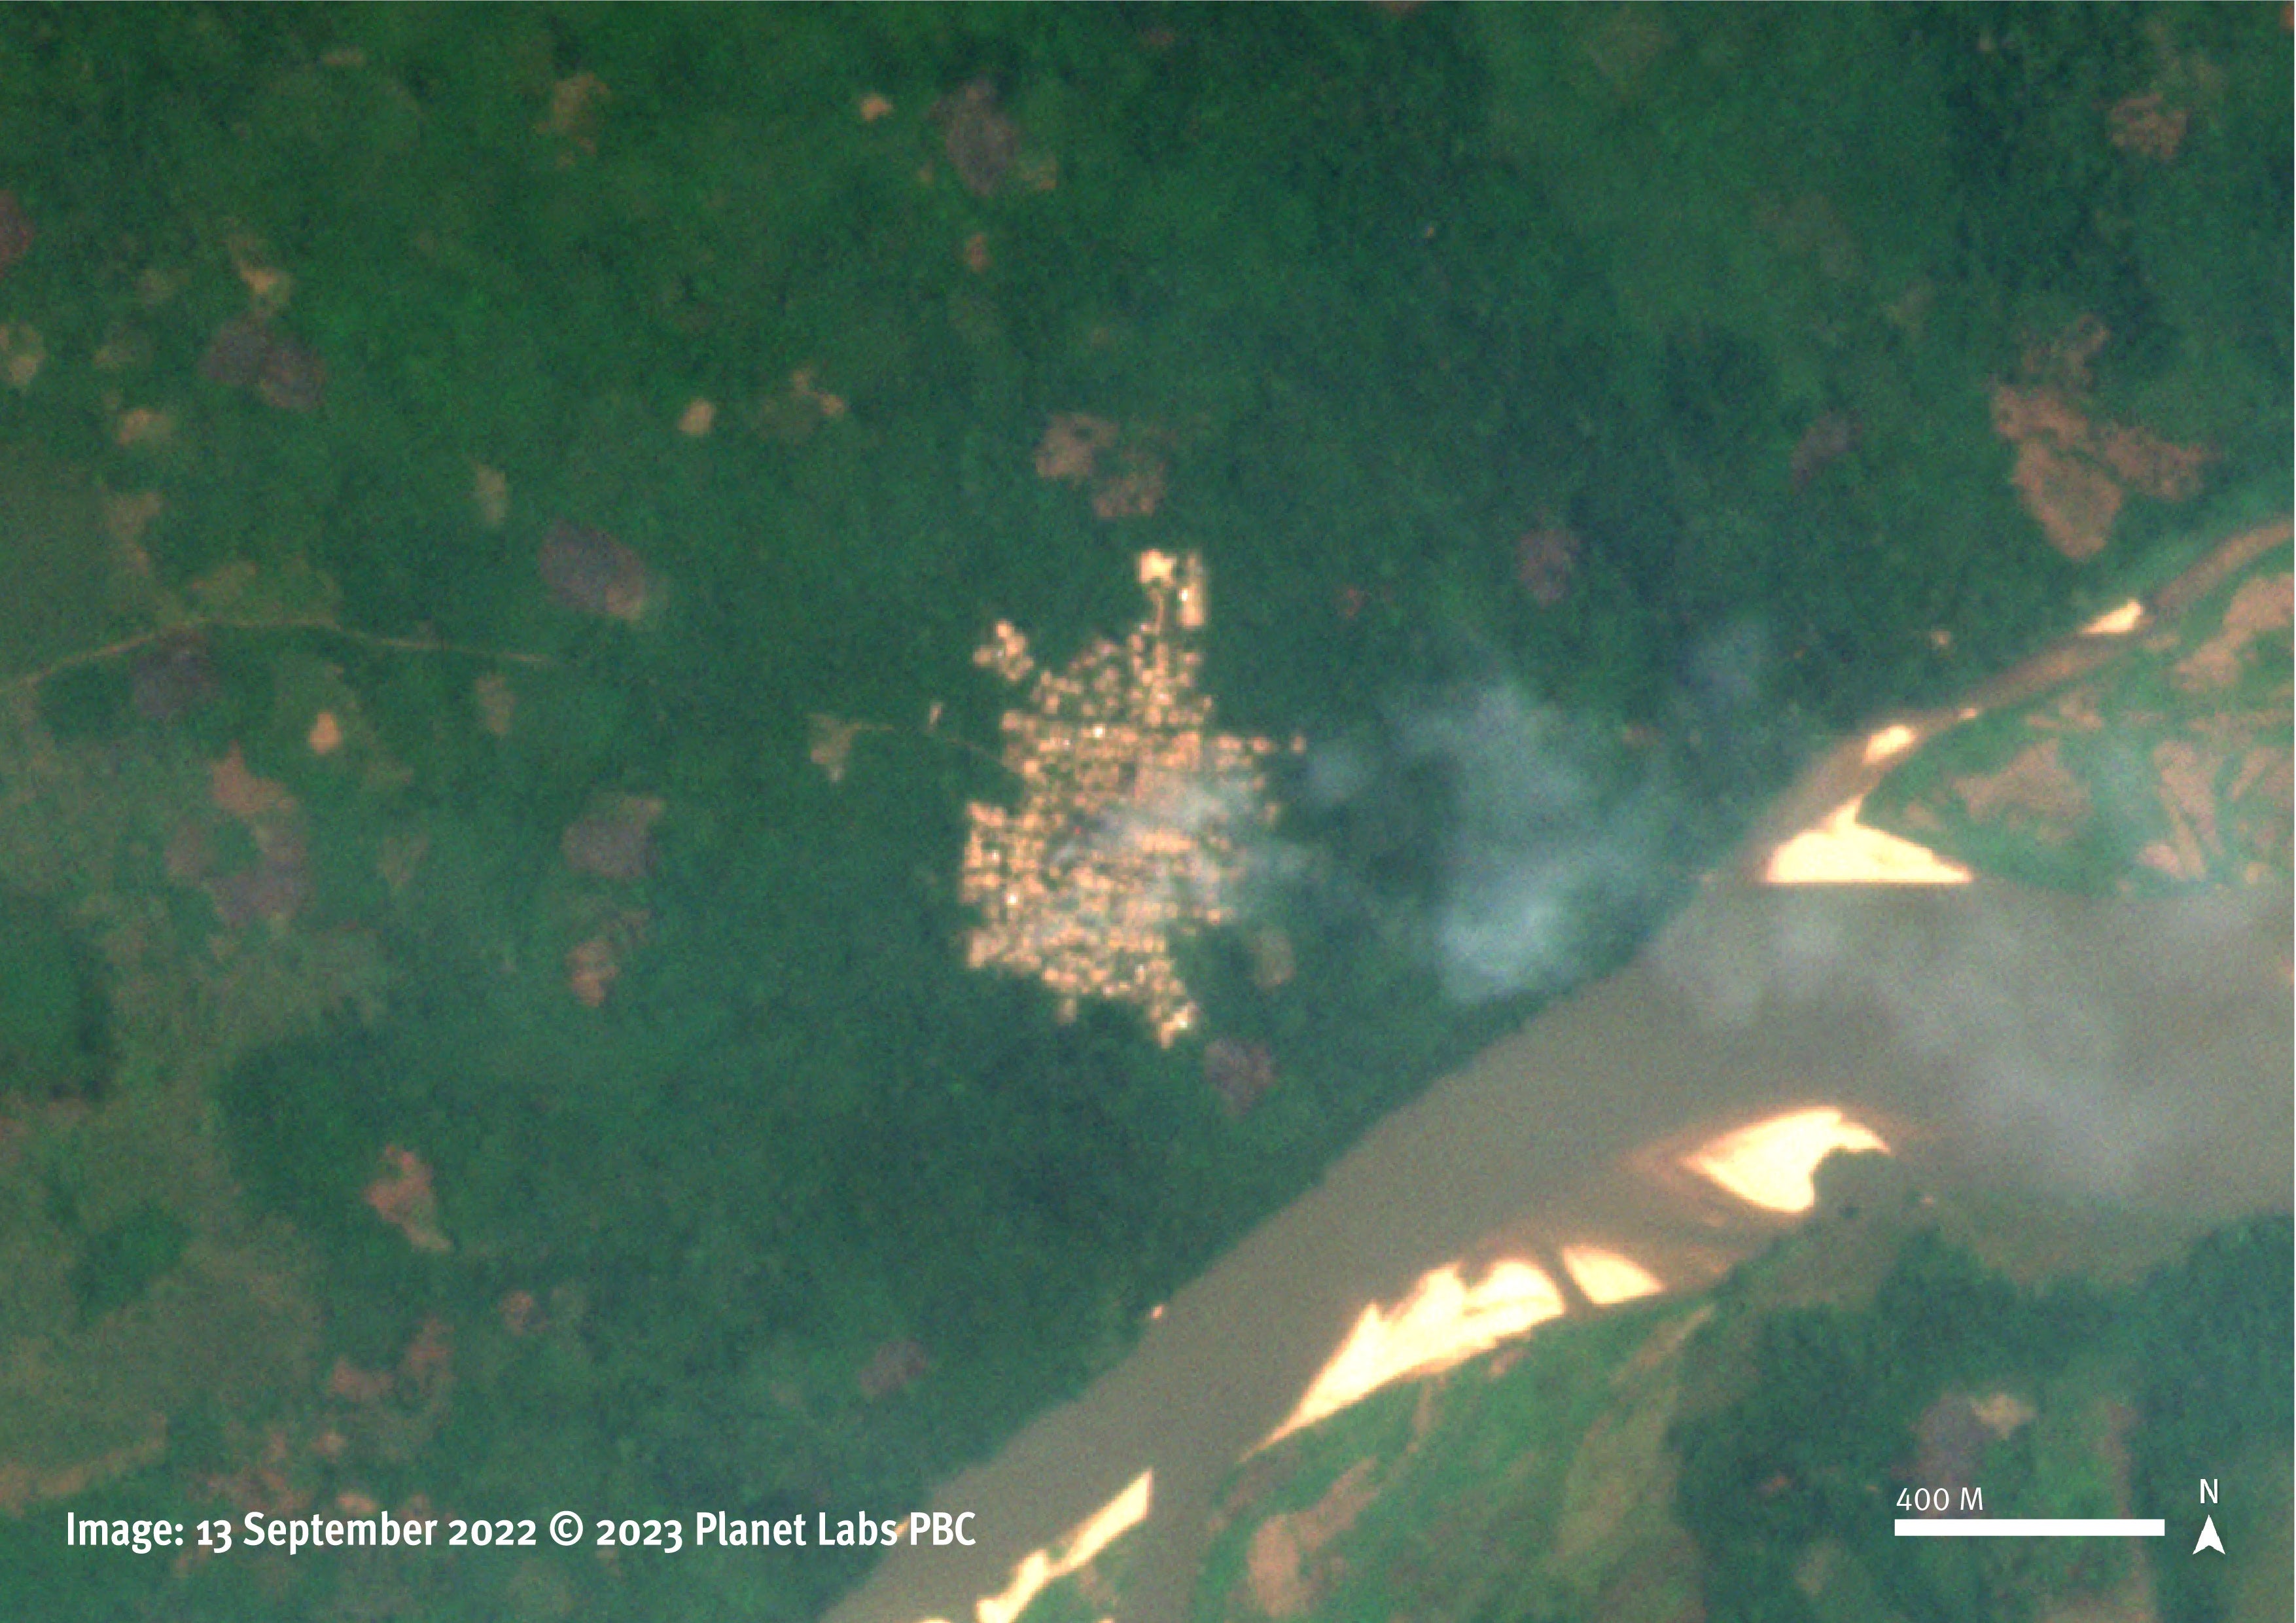 Satellite image showing smoke plumes from a fire 